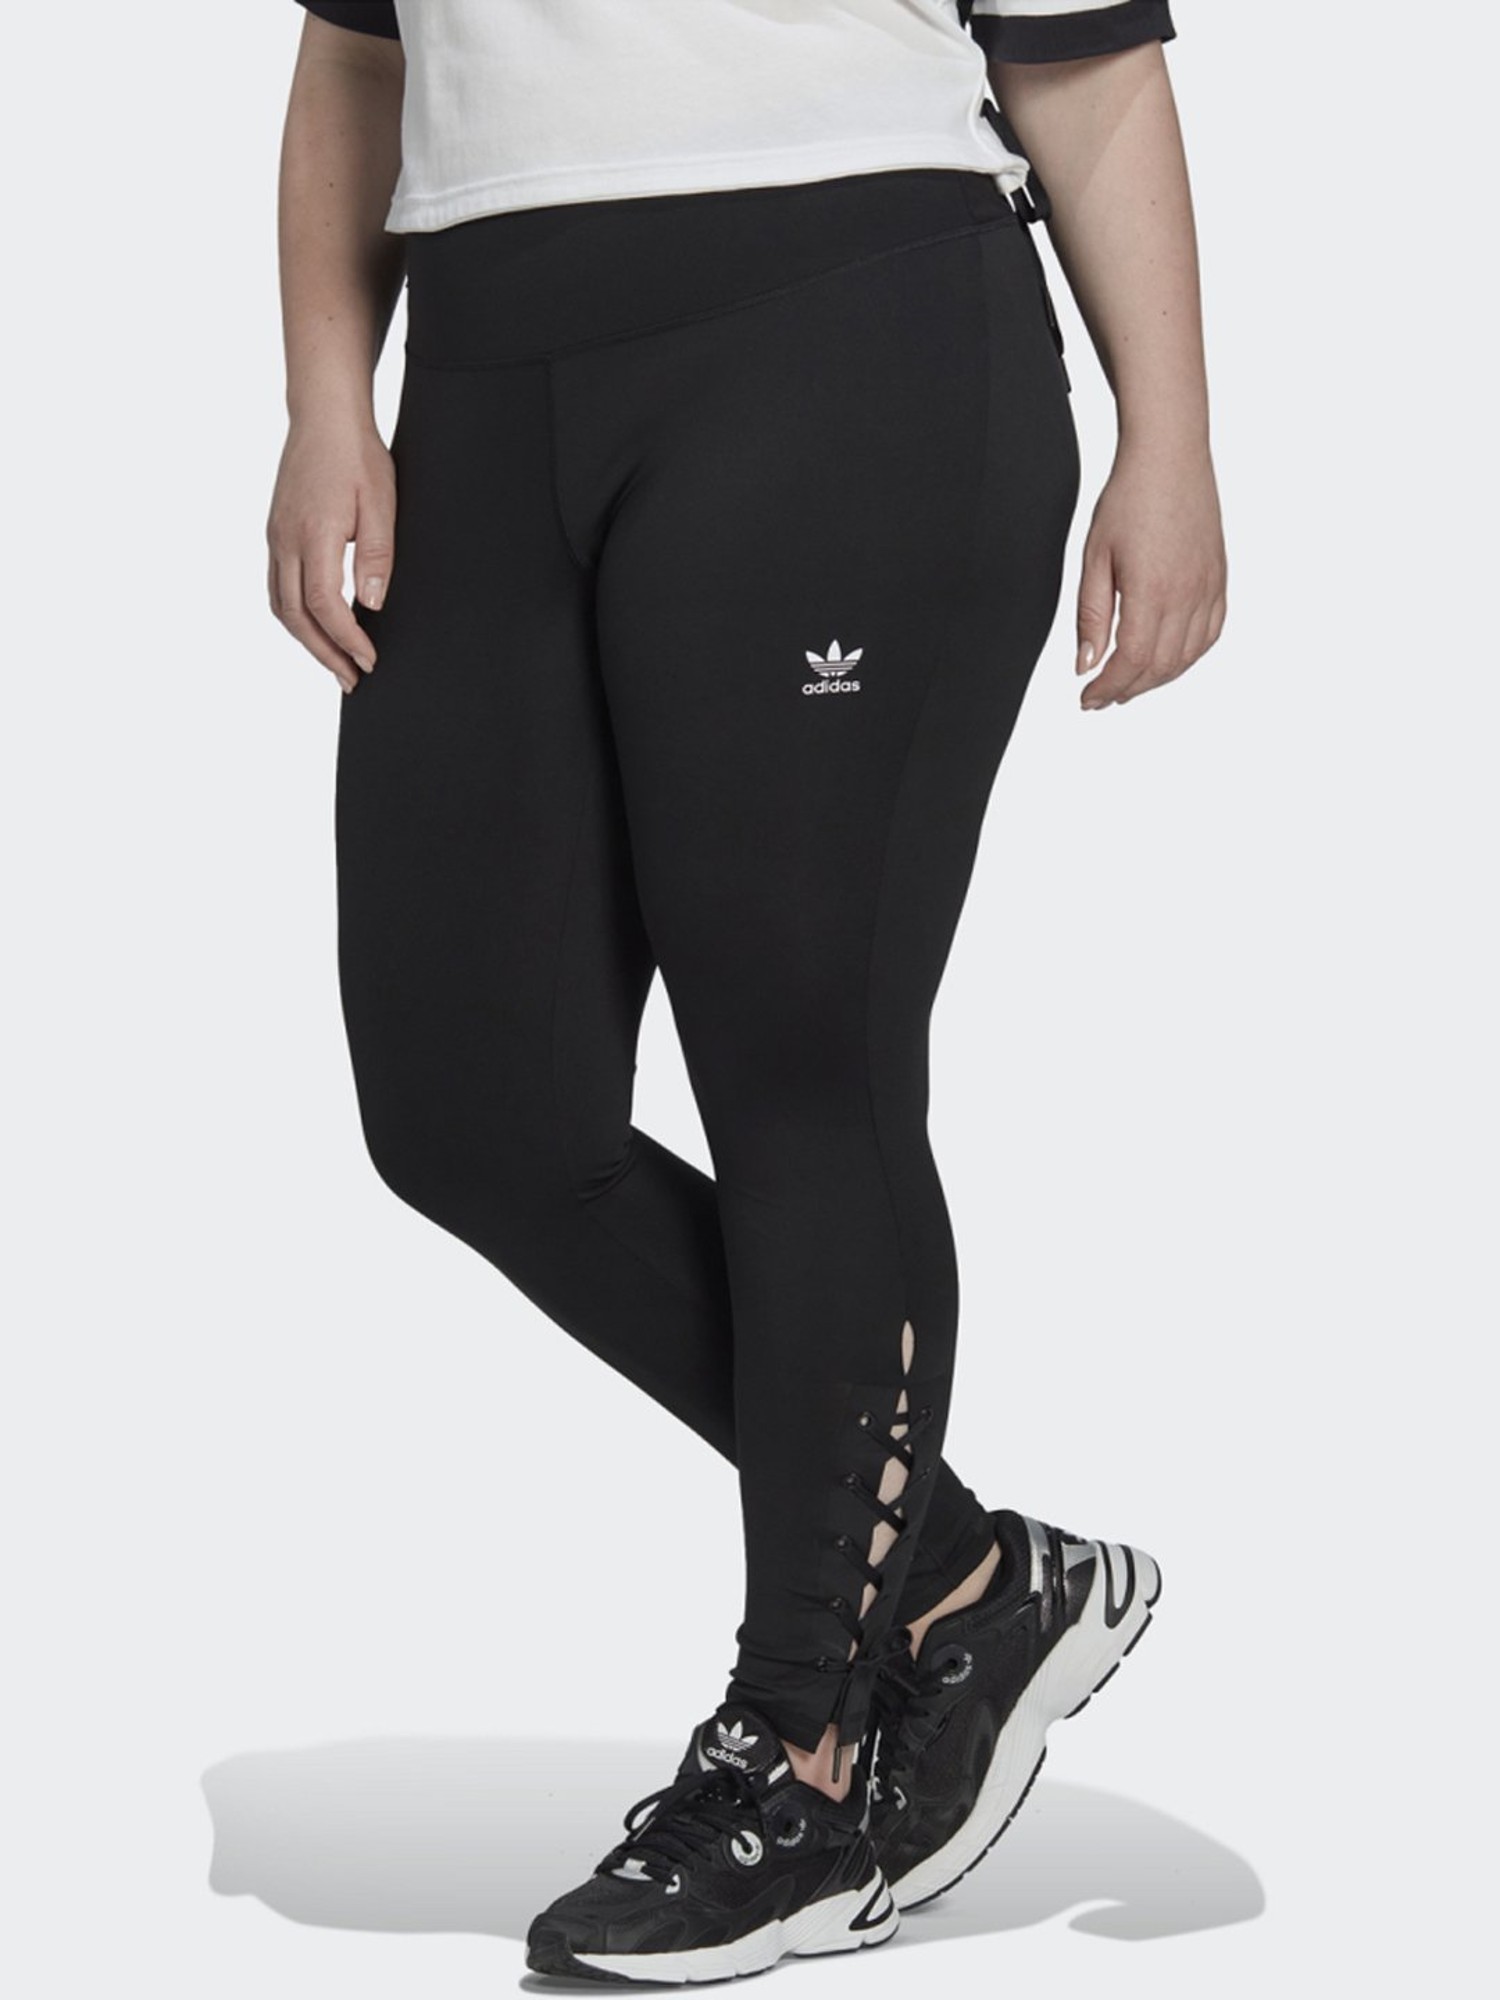 adidas Female Essentials 3-Stripes Tights, Black/Power Pink,XS : Amazon.in:  Clothing & Accessories